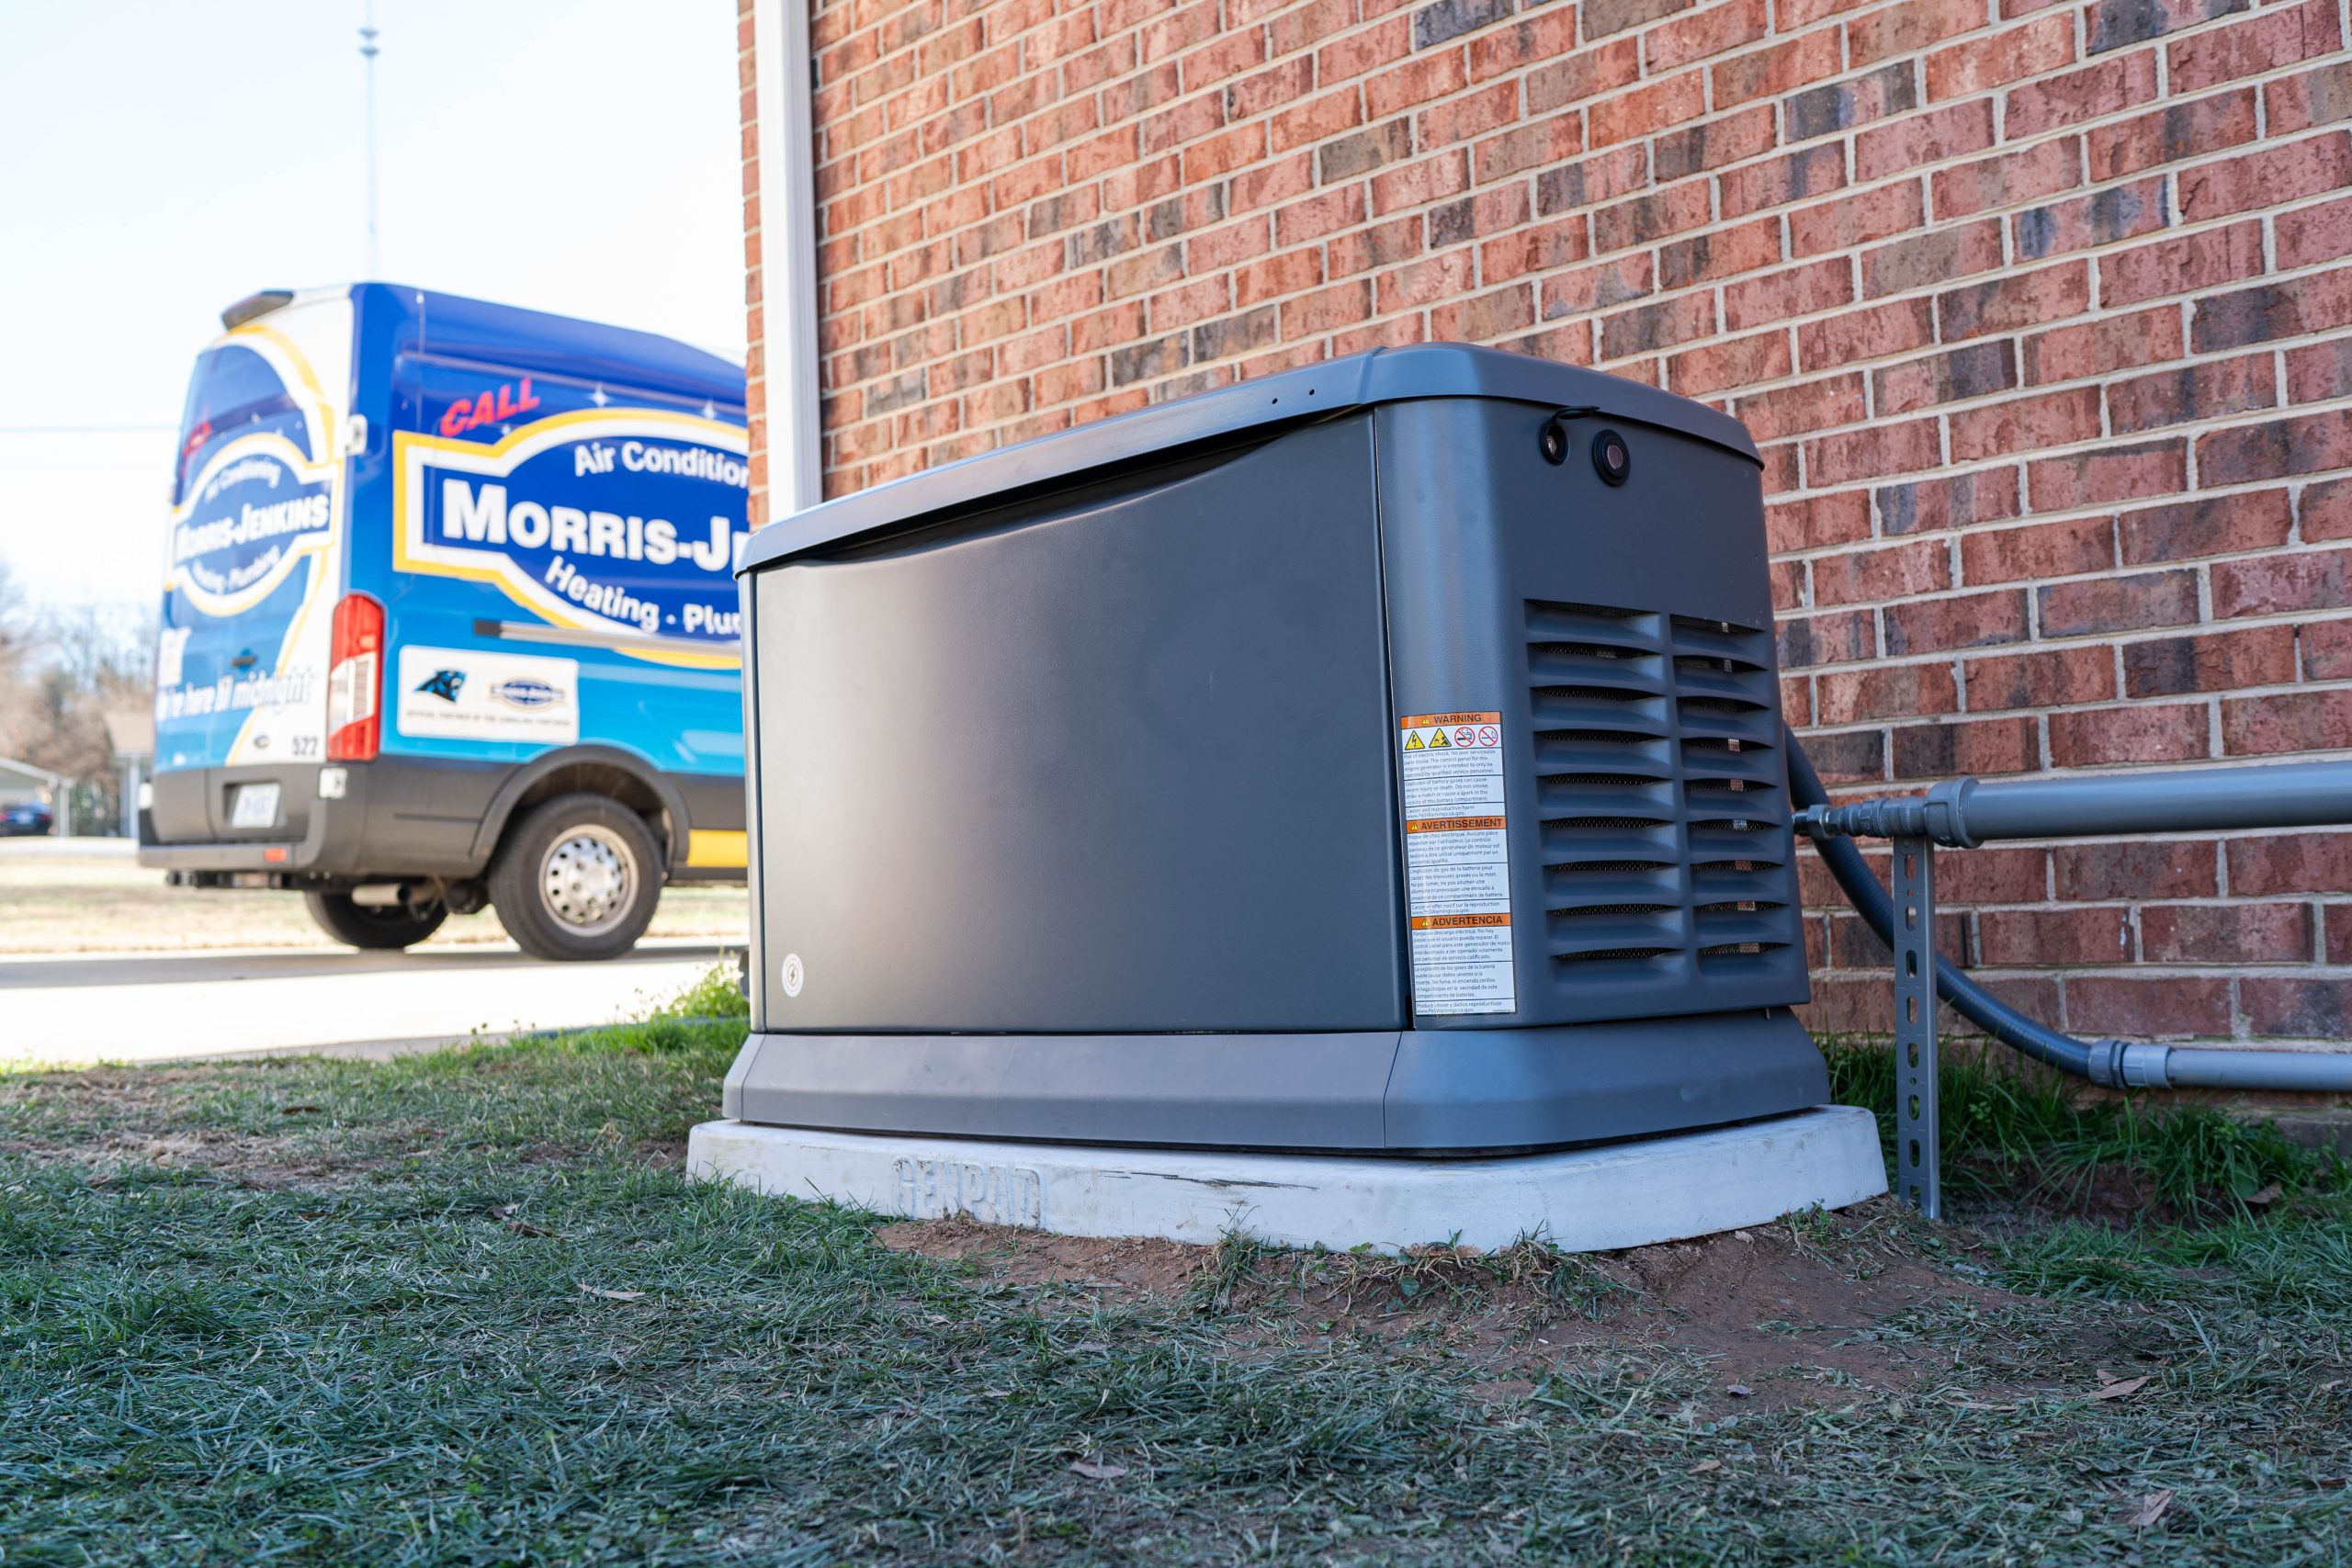 A large, gray backup generator is installed next to a brick building, ready to handle any electrical surge. A service van with "Morris-Jenkins Heating Plumbing Air Conditioning" is parked nearby, ensuring swift support.